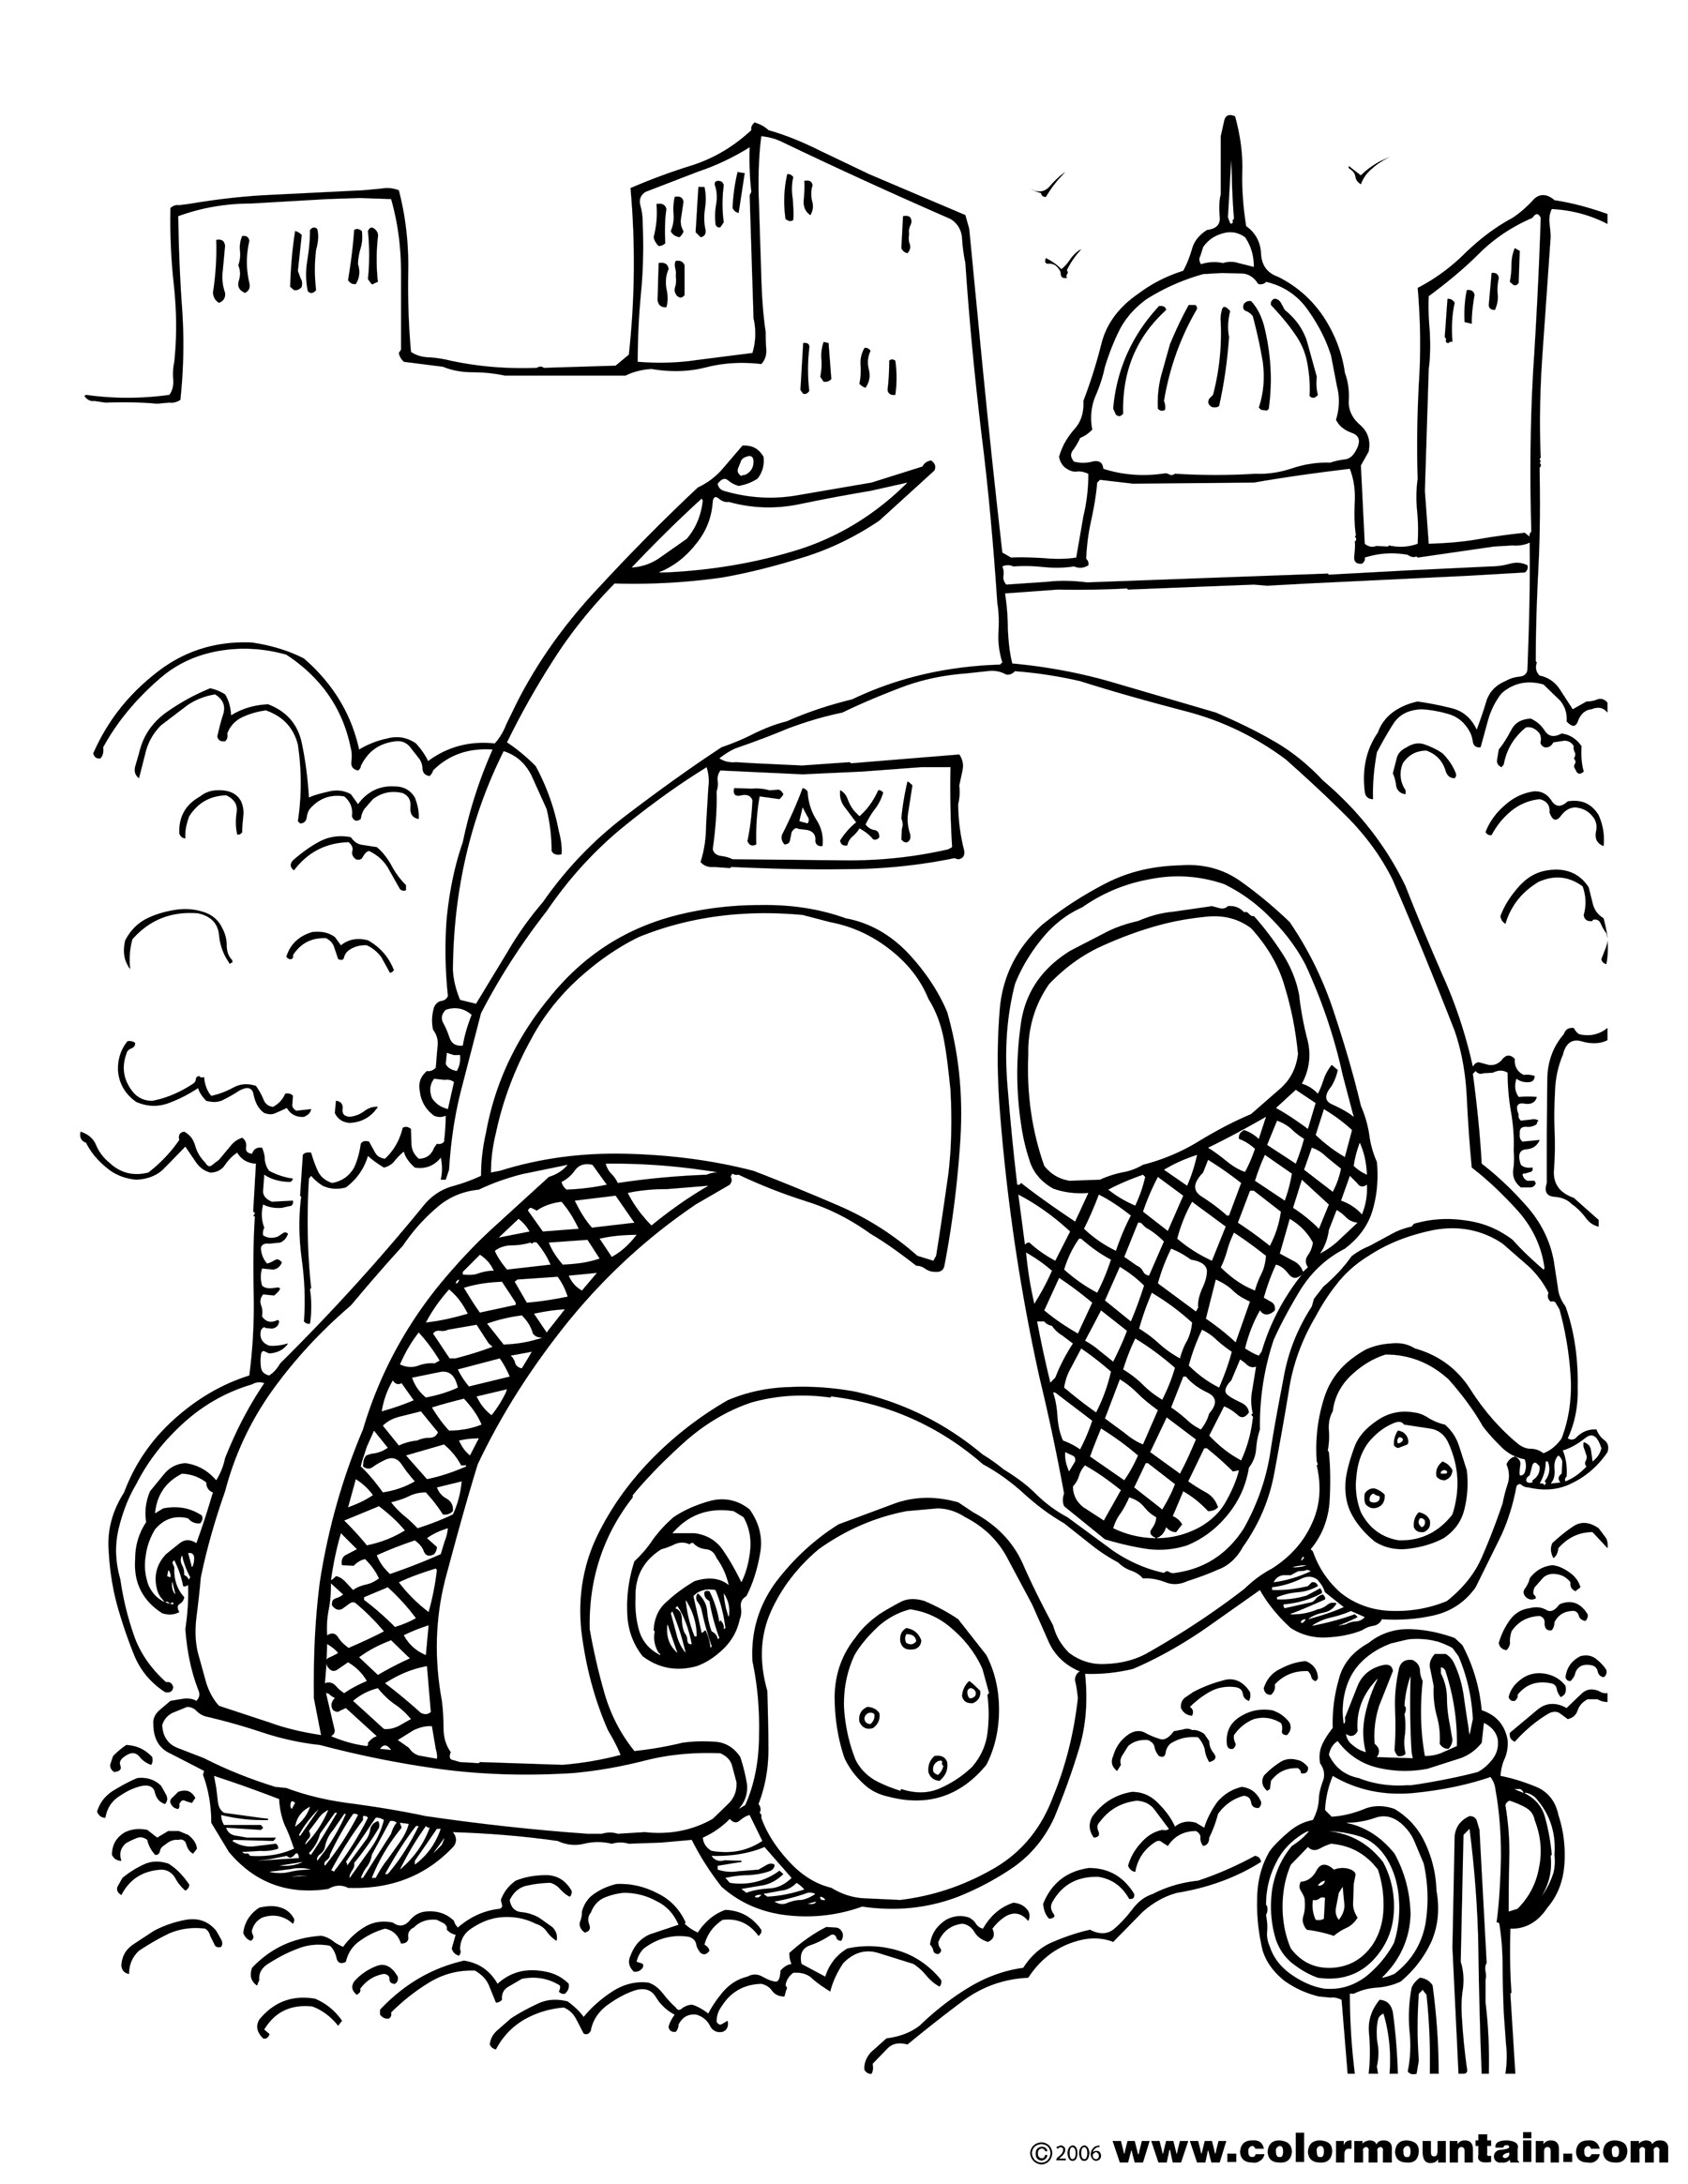 Free Taxi Coloring Sheet - Create A Printout Or Activity